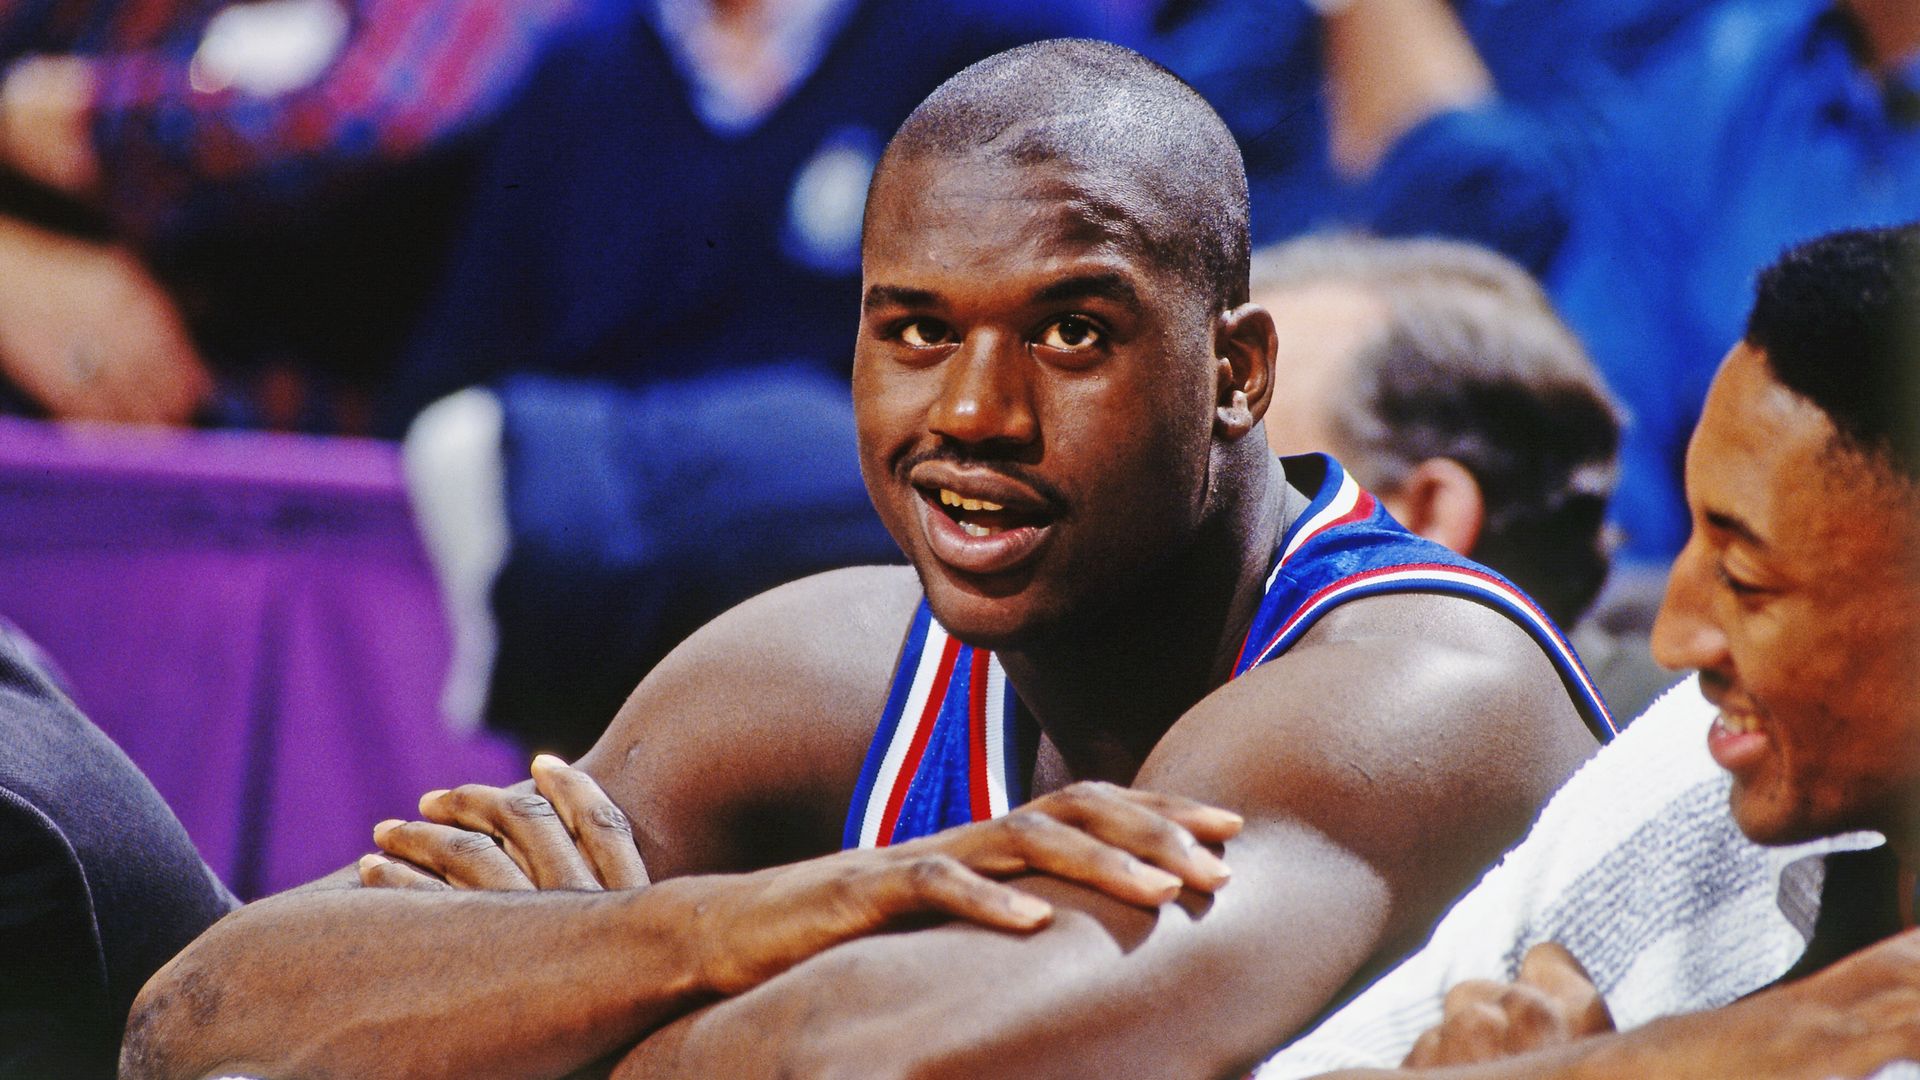 Shaquille O'Neal with his arms crossed in this 1993 photo.